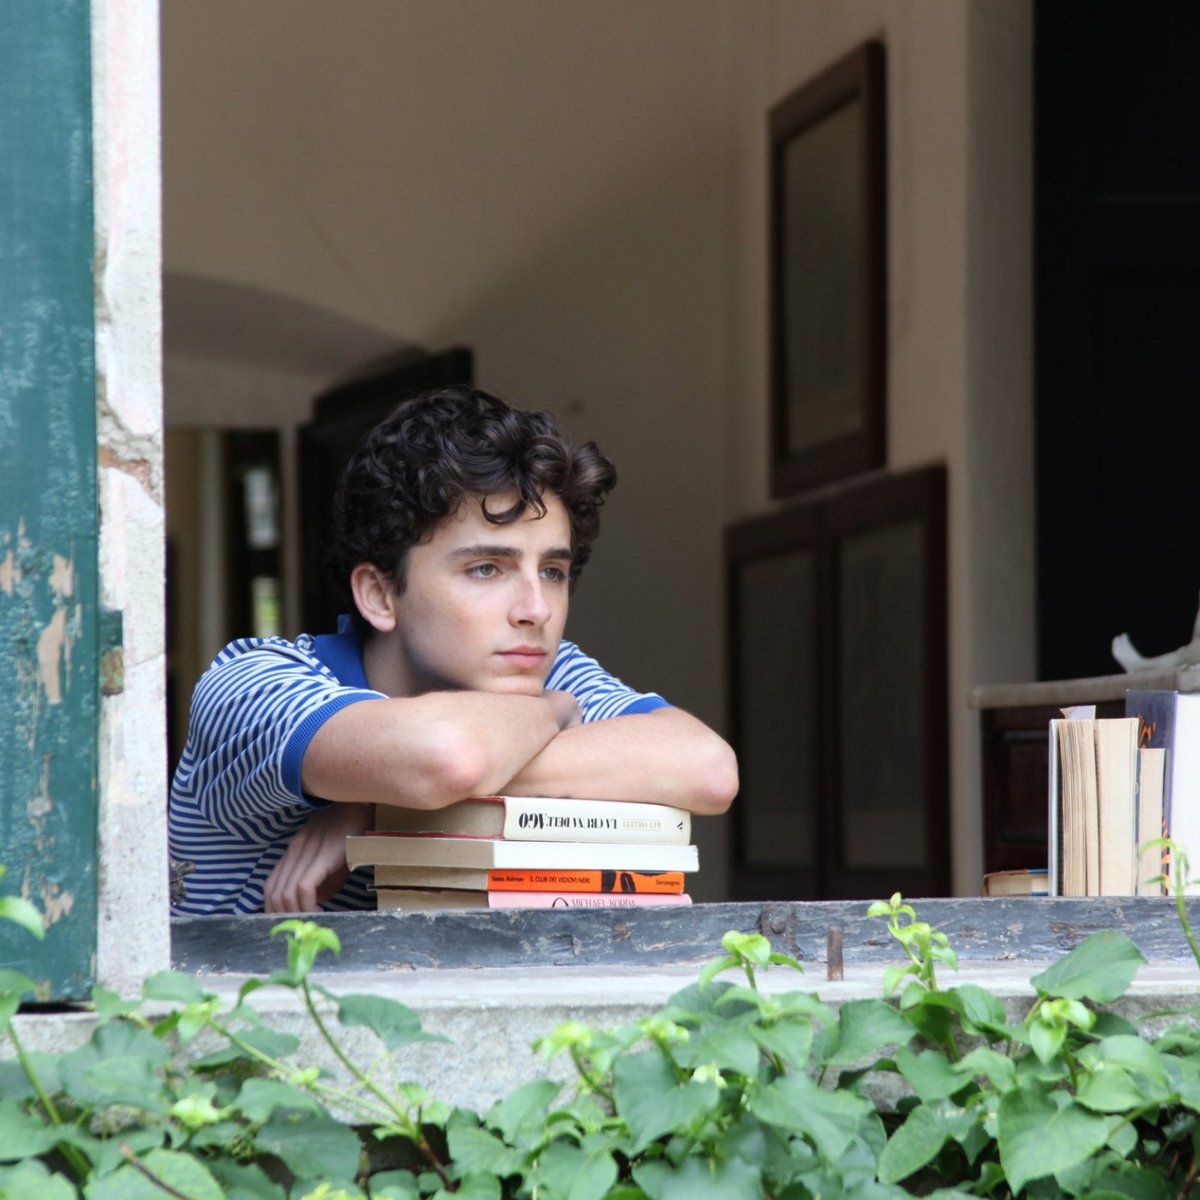 Timothée Chalamet as Elio Perlman in "Call Me By Your Name" (2017), directed by Luca Guadagnino